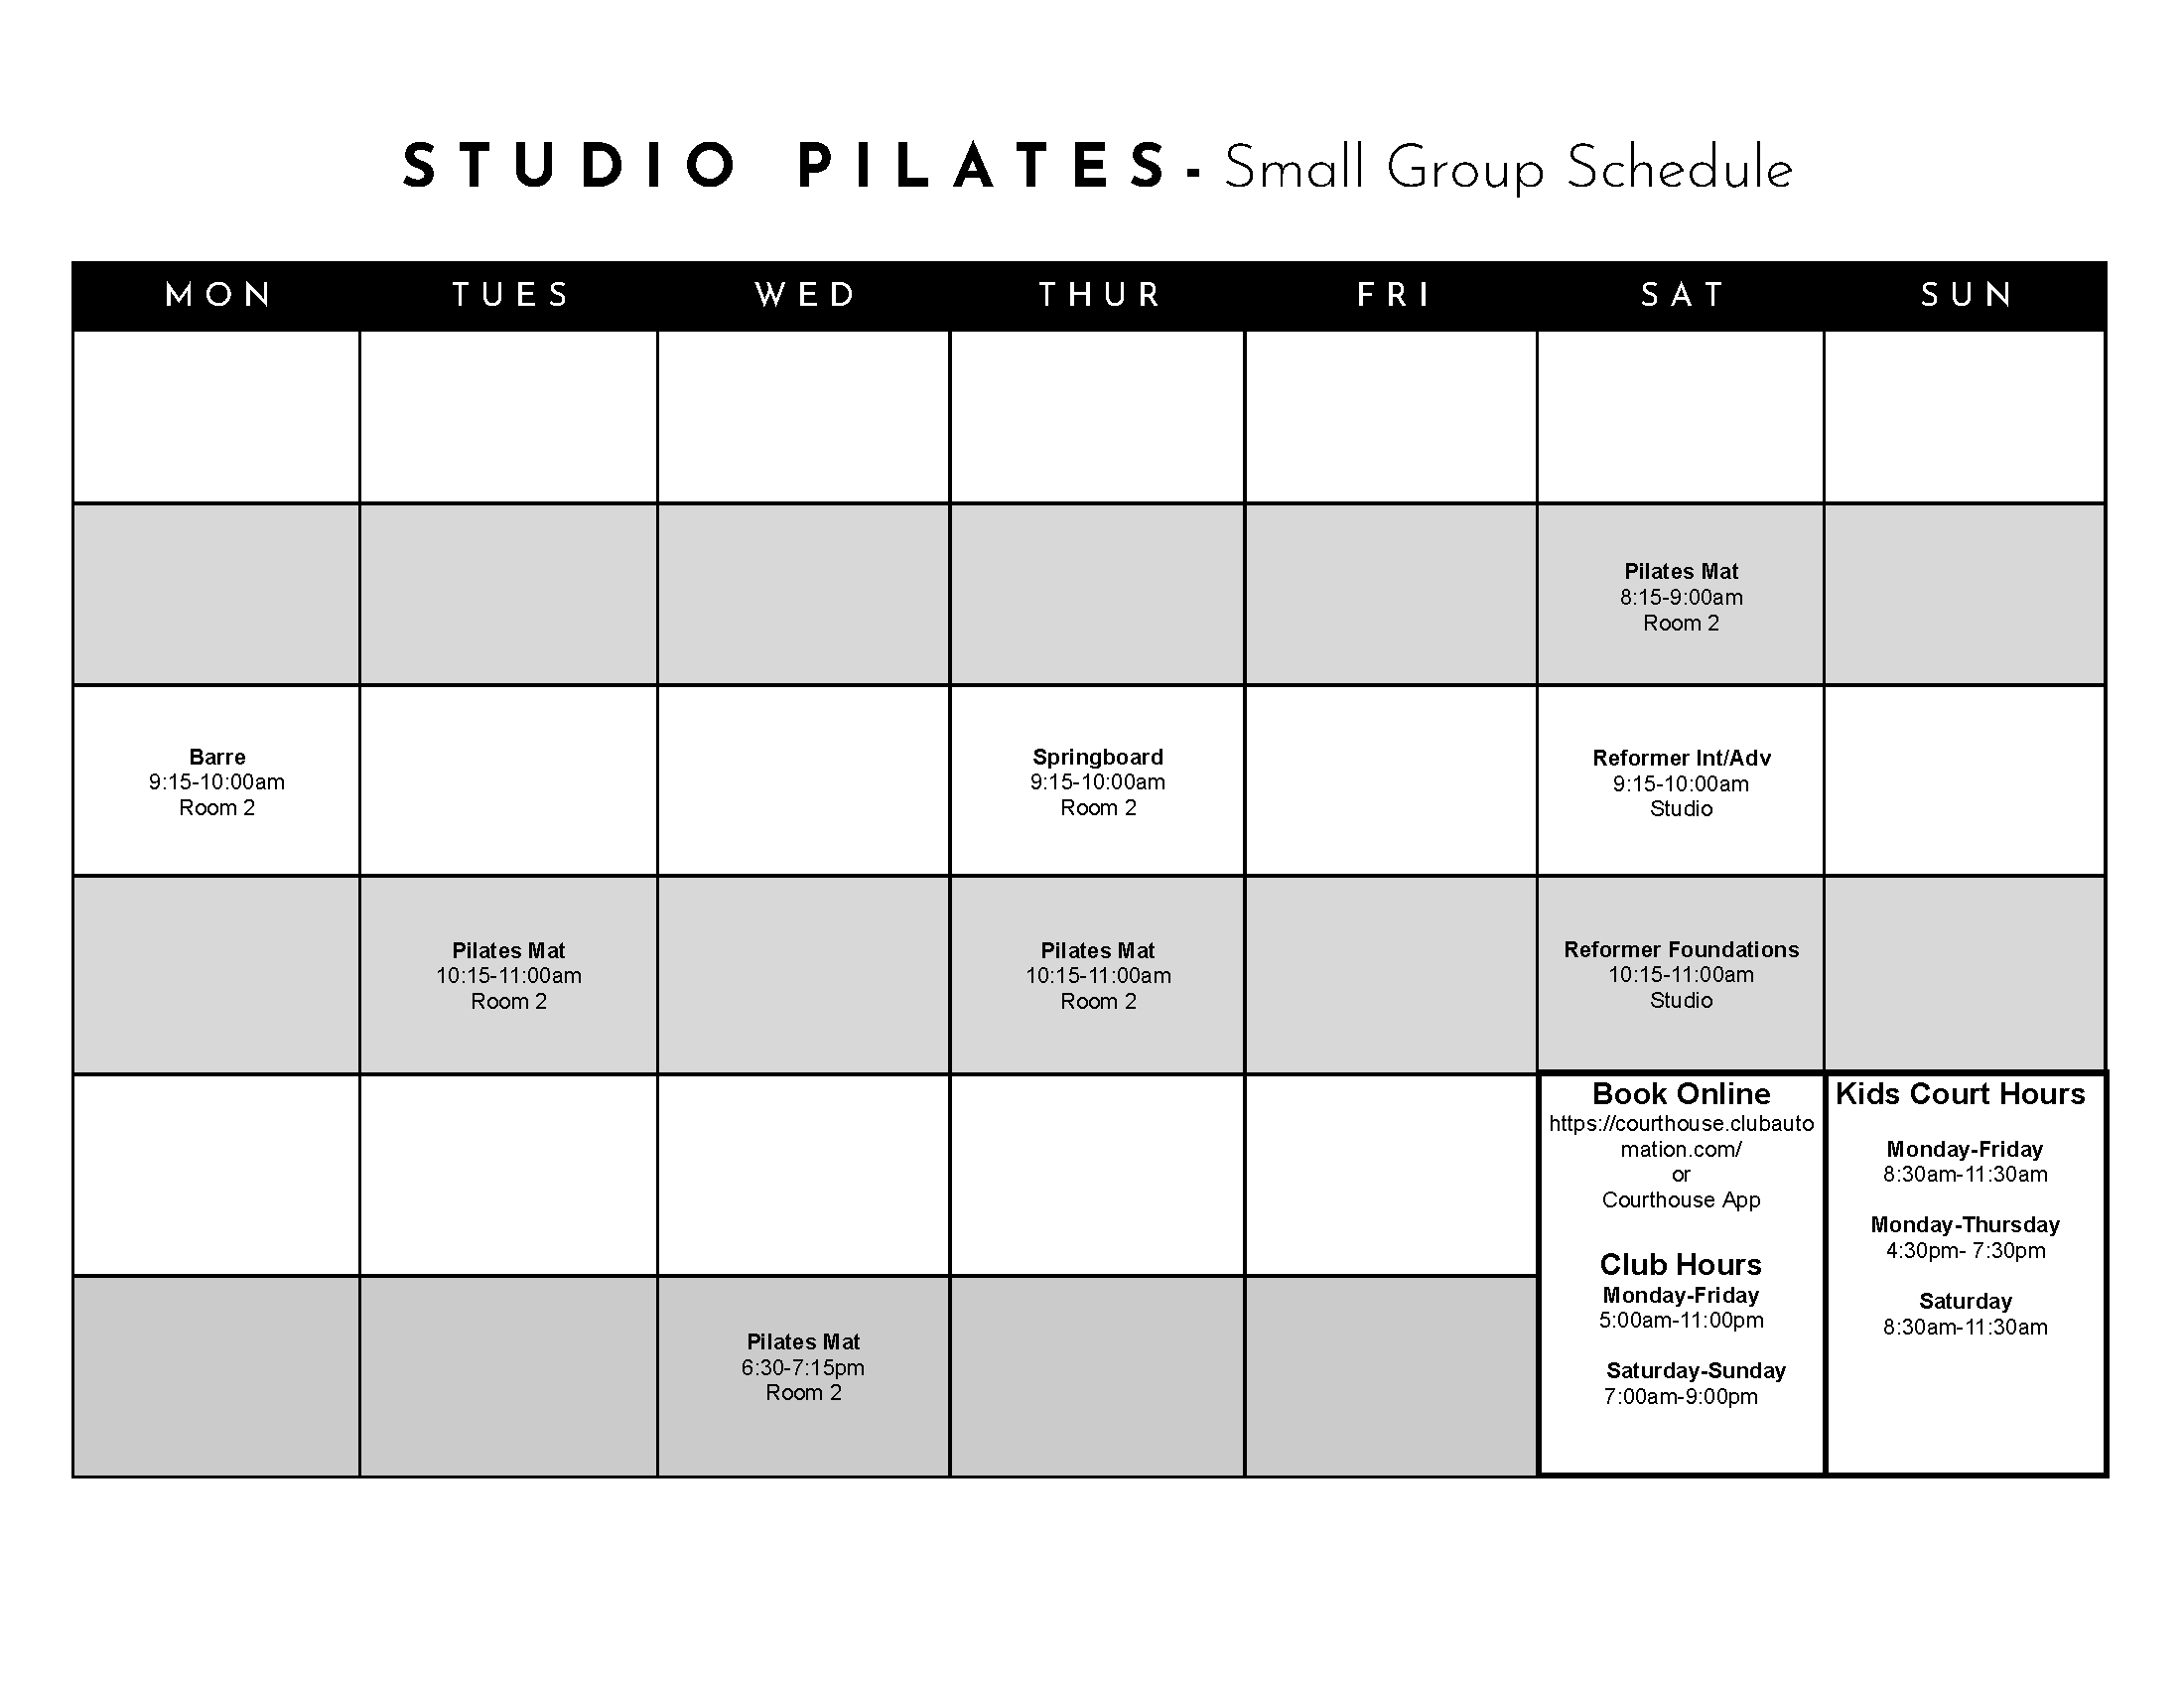 Pilates - Courthouse Club Fitness